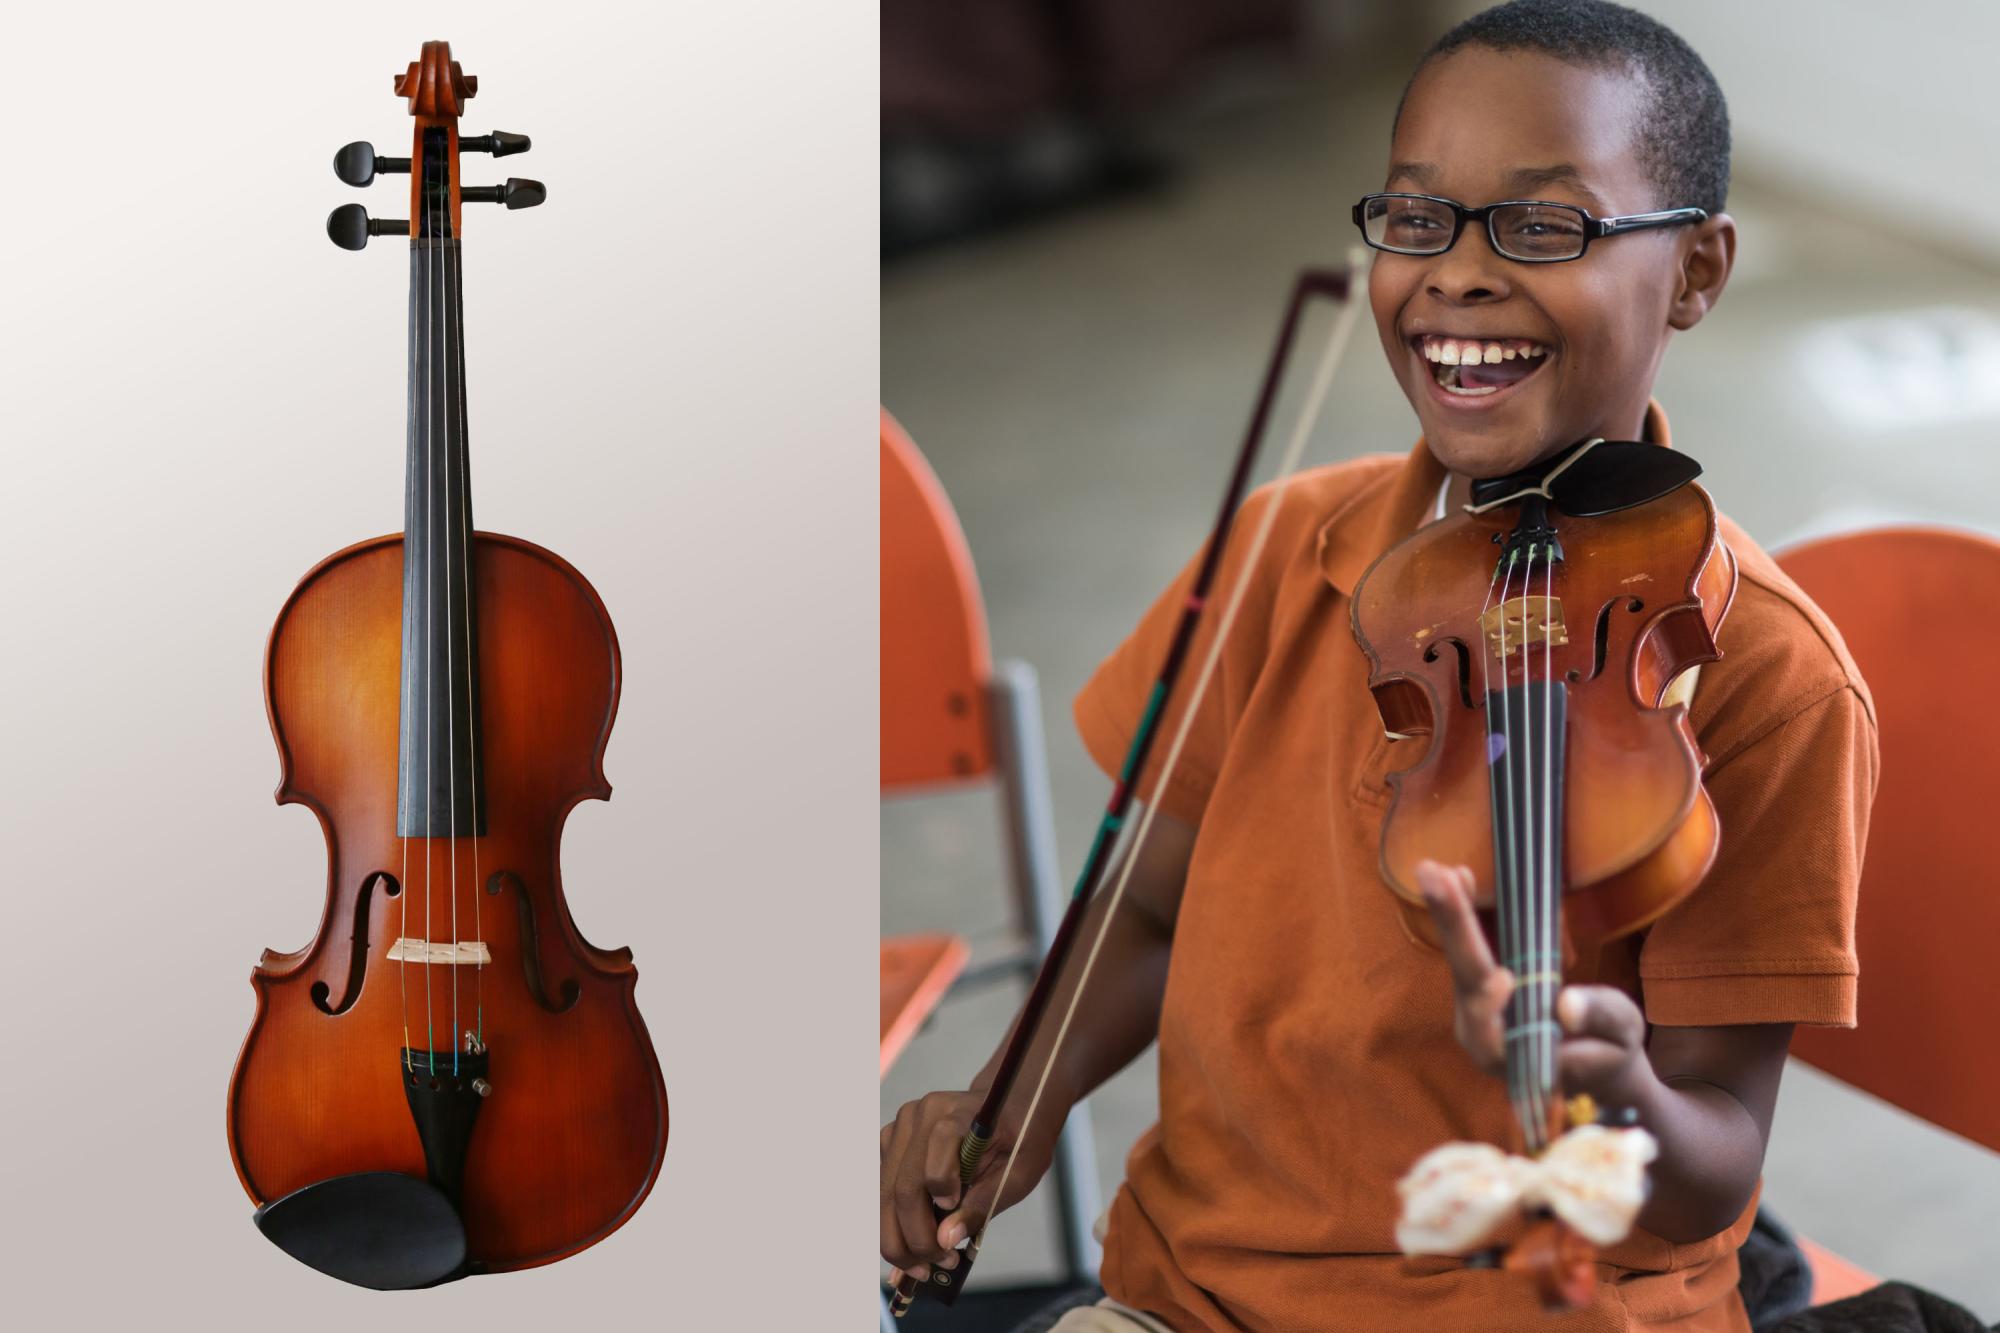 a side-by-side image of a full sized viola and a child playing a smaller viola made for students